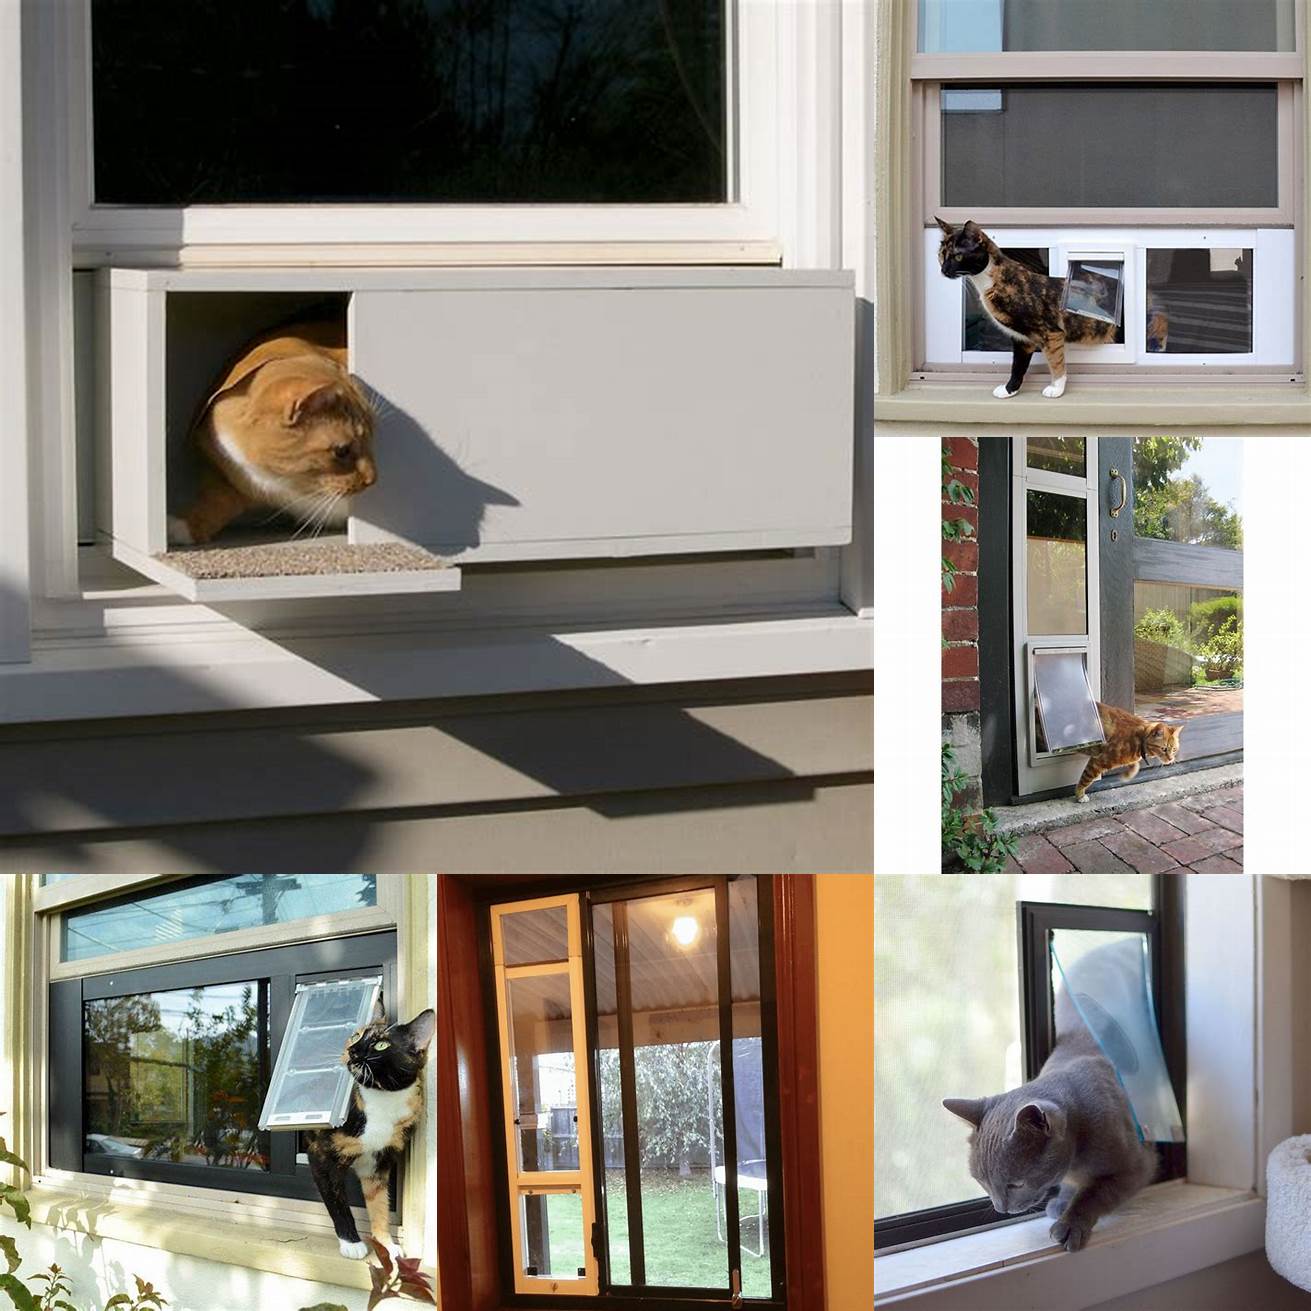 Q Do cat doors for sliding windows come in different sizes